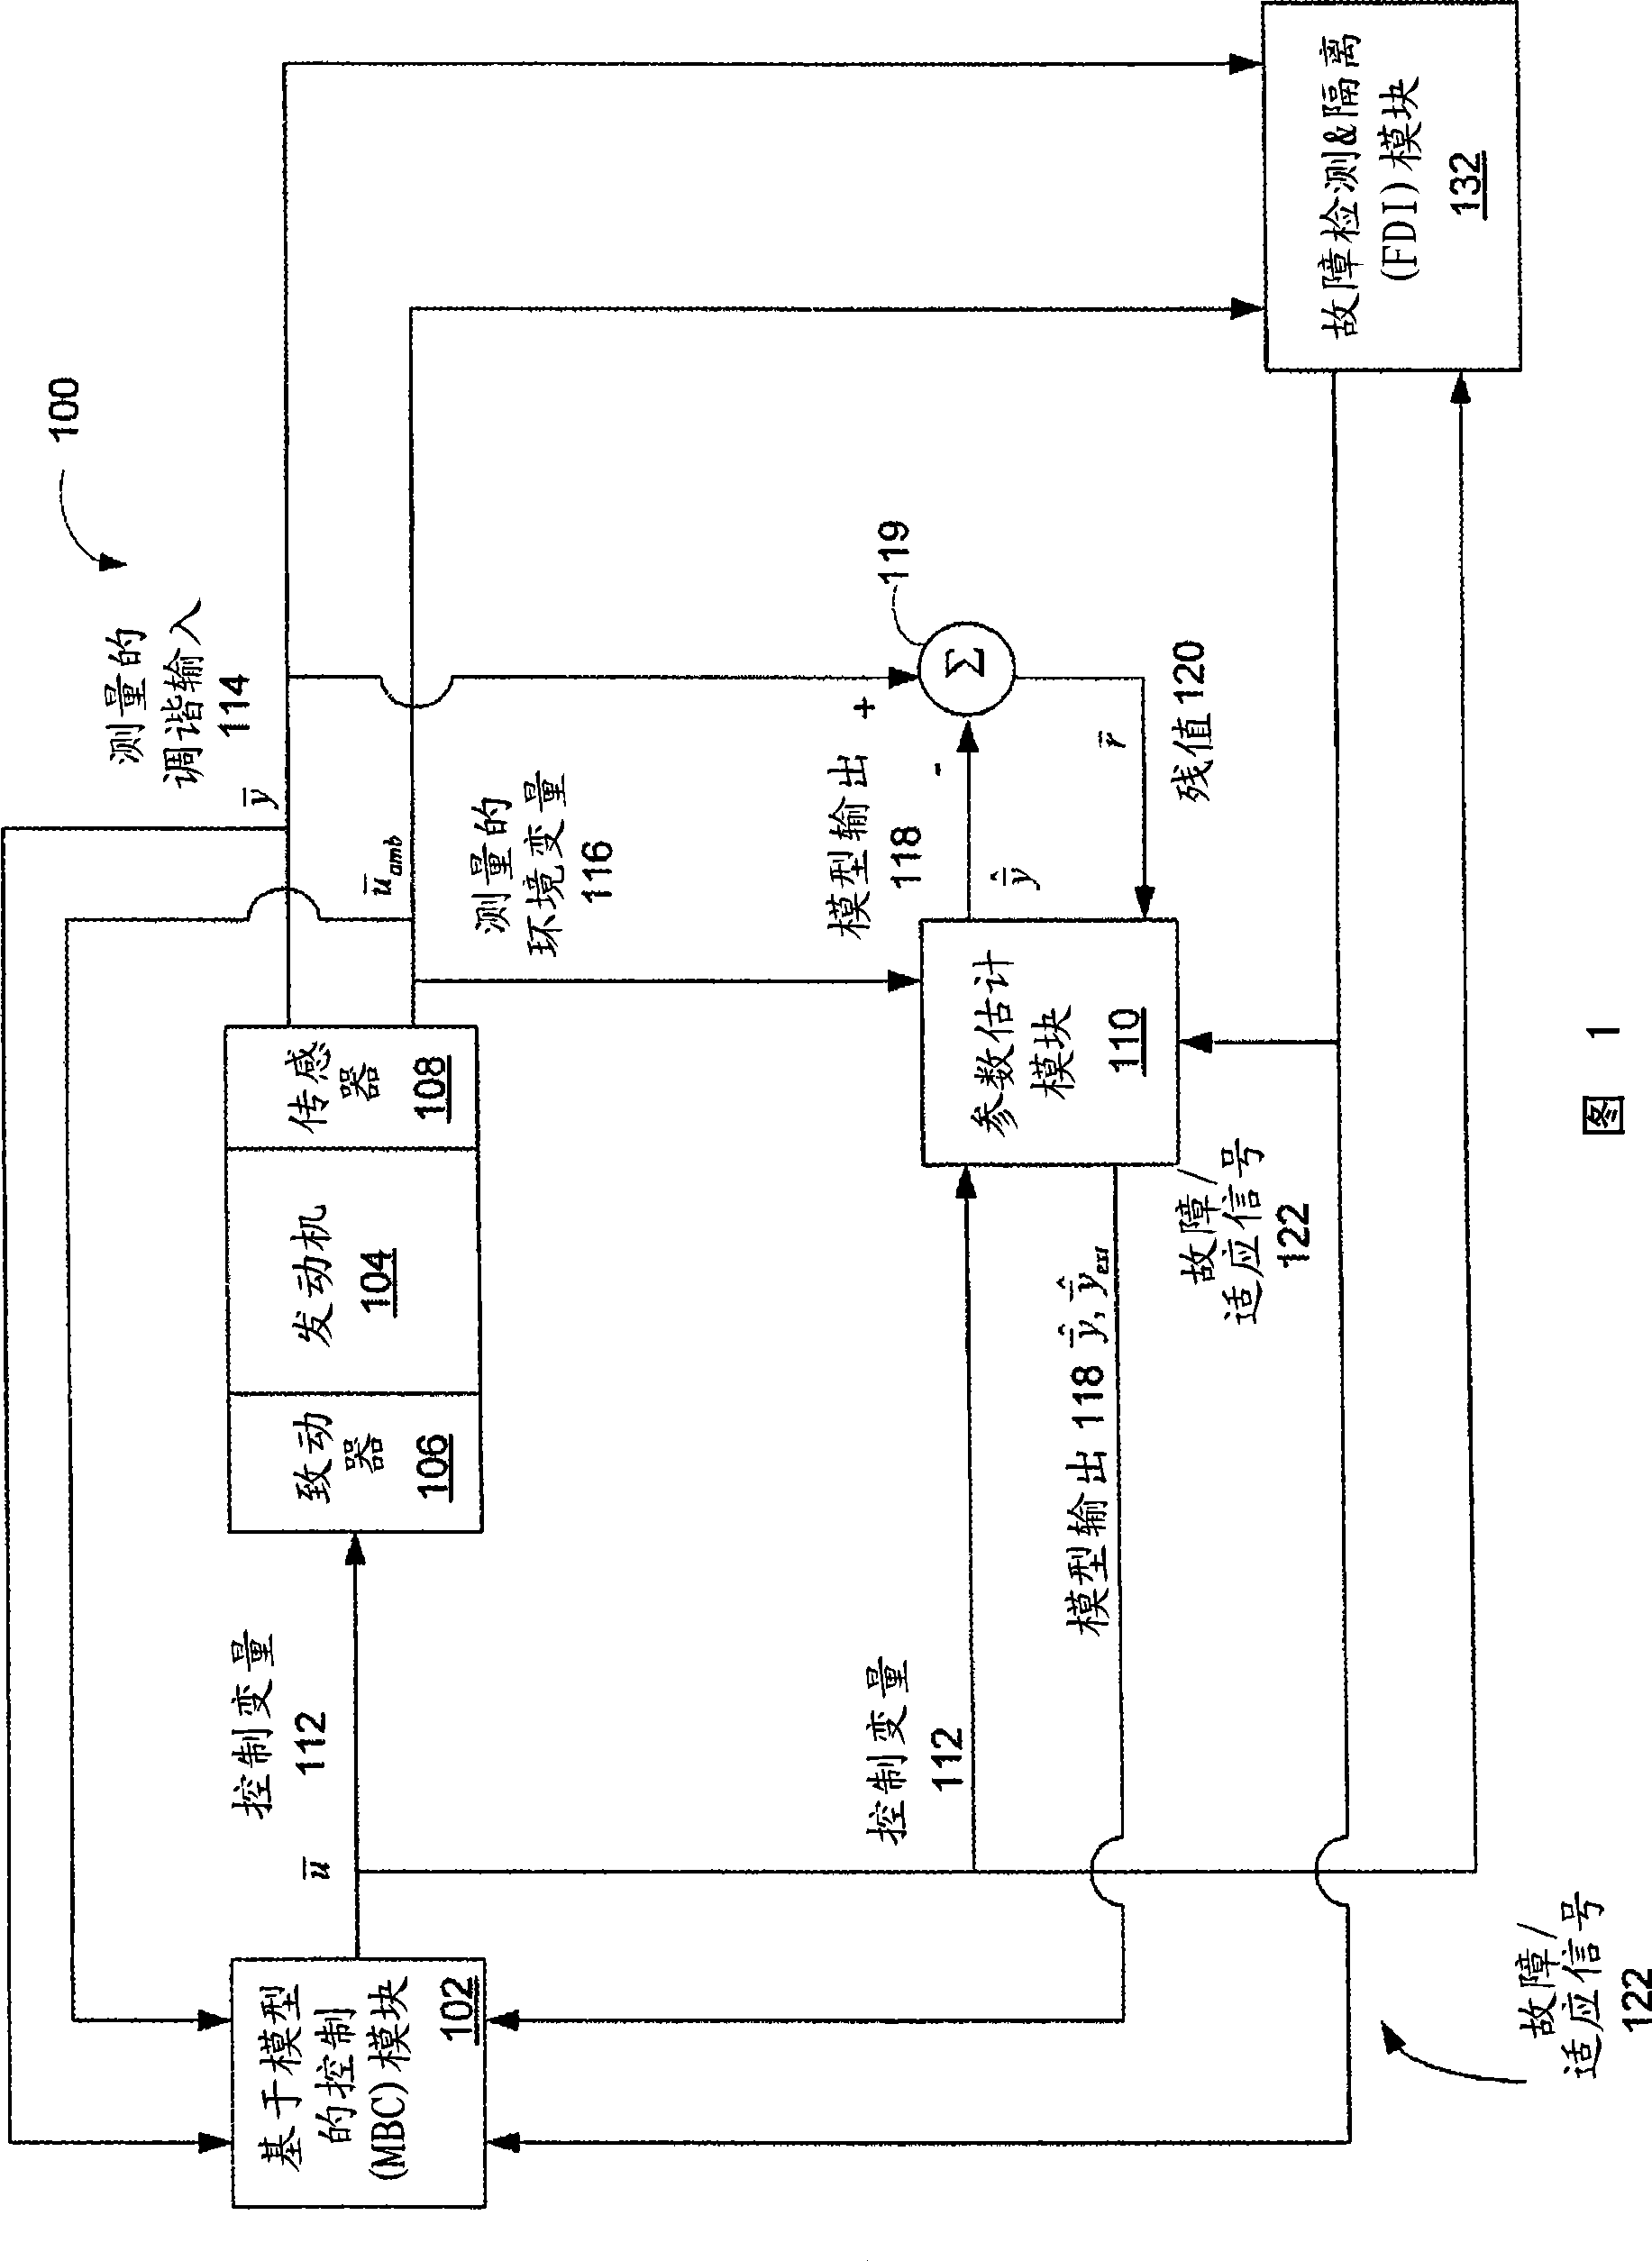 Systems and methods for model-based sensor fault detection and isolation